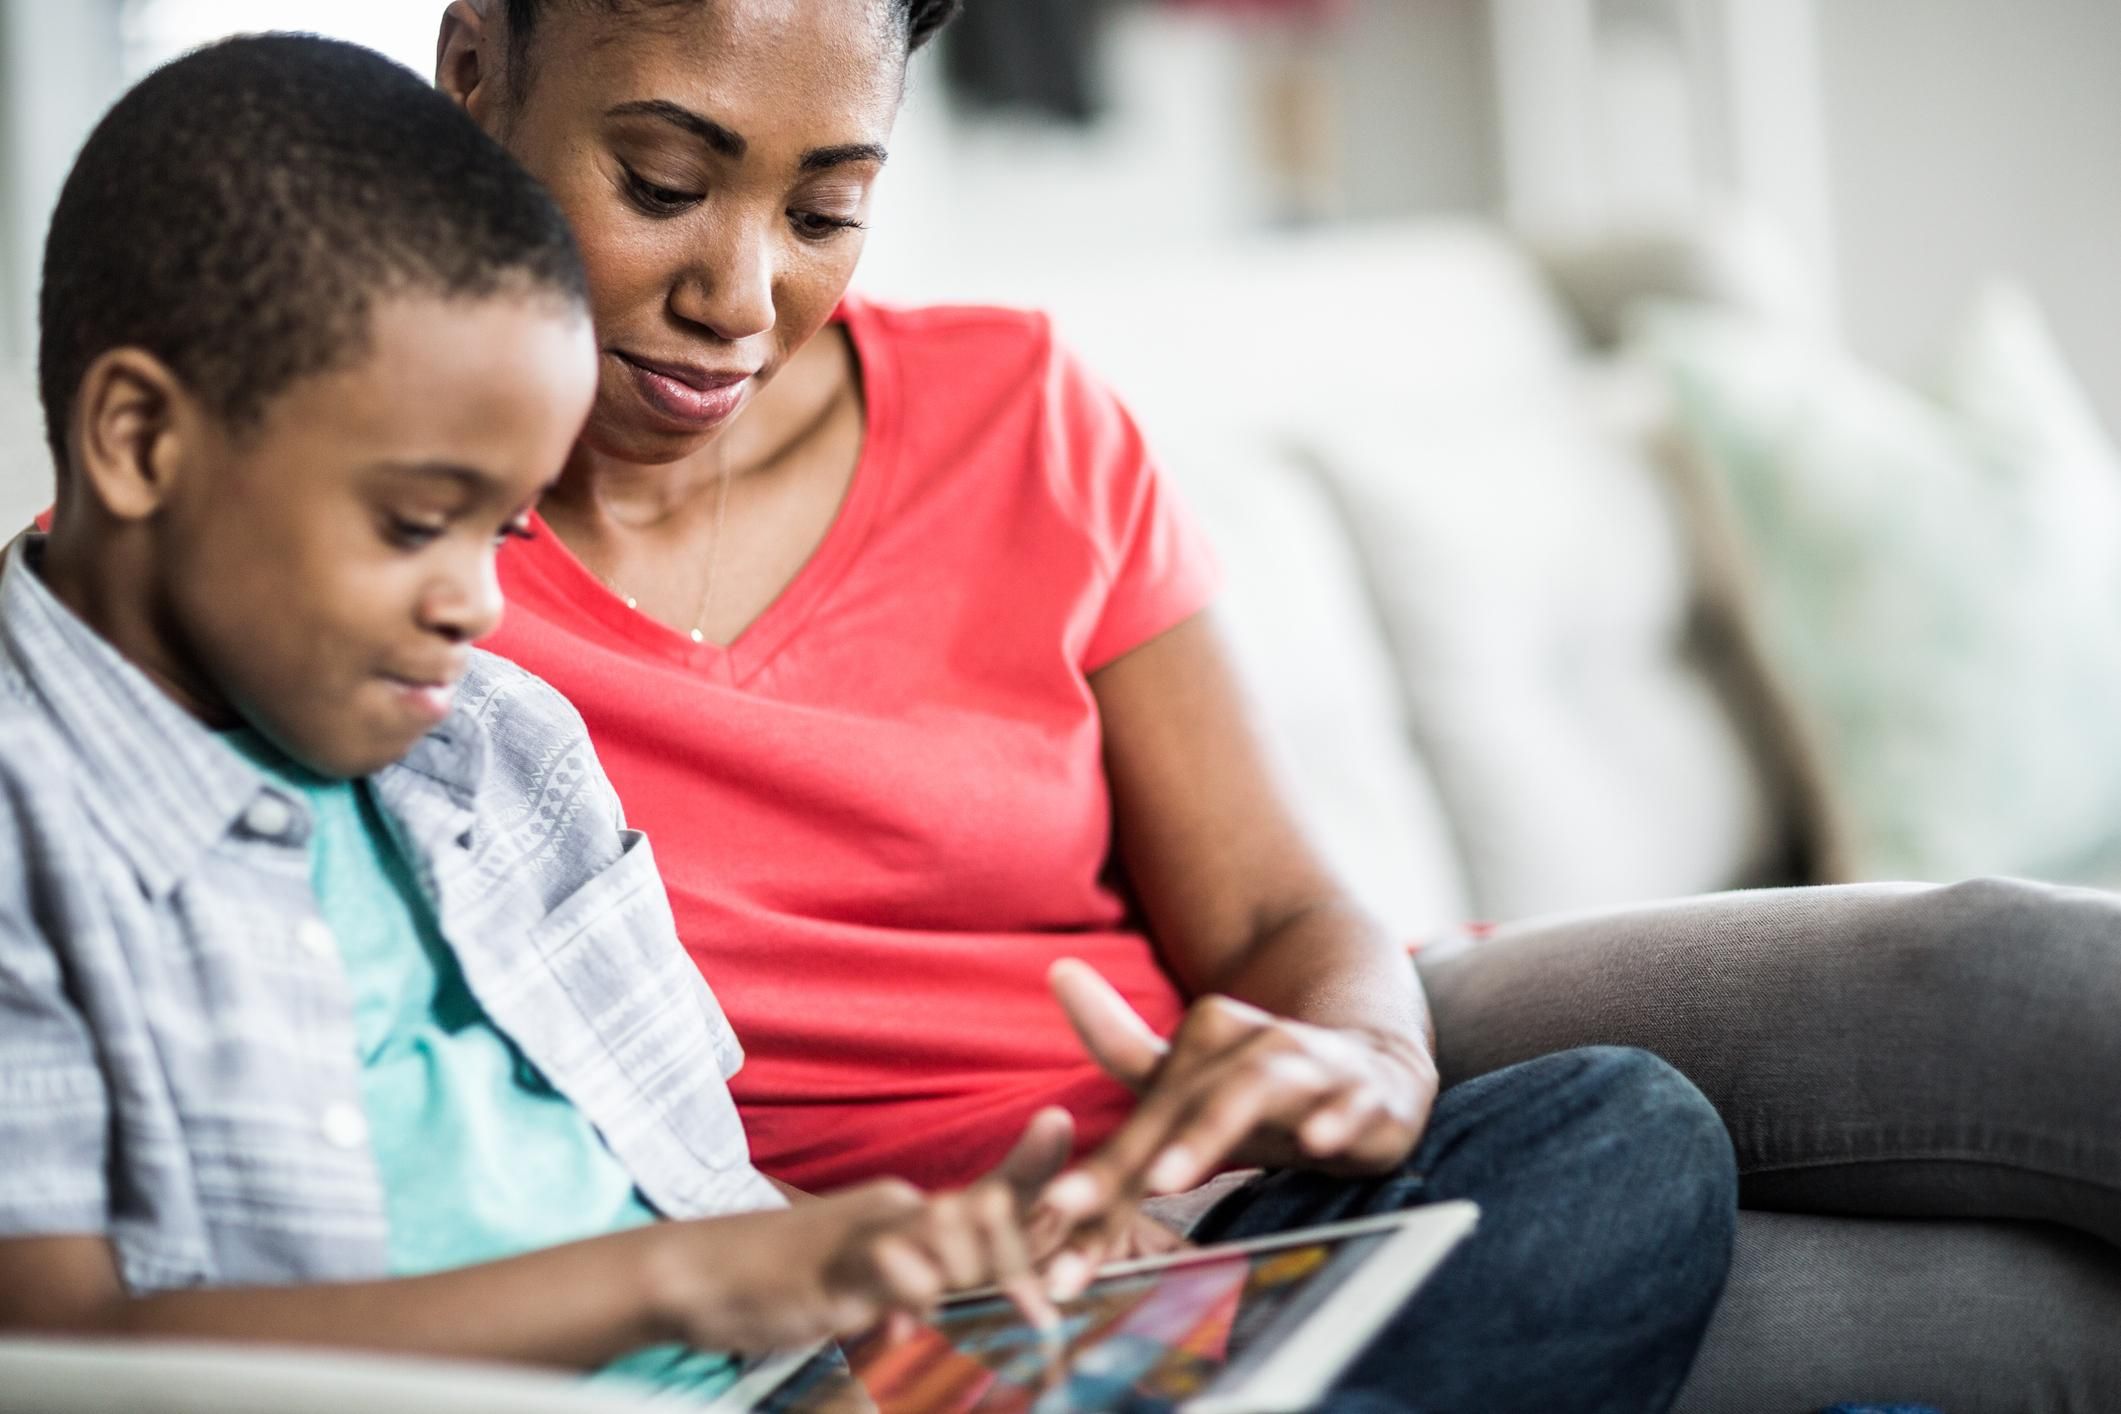 Adults living without broadband face significant barriers in accessing employment, education, and other necessities—but children are also impacted. (Photo: Getty/Stock Photo/MoMo Productions)